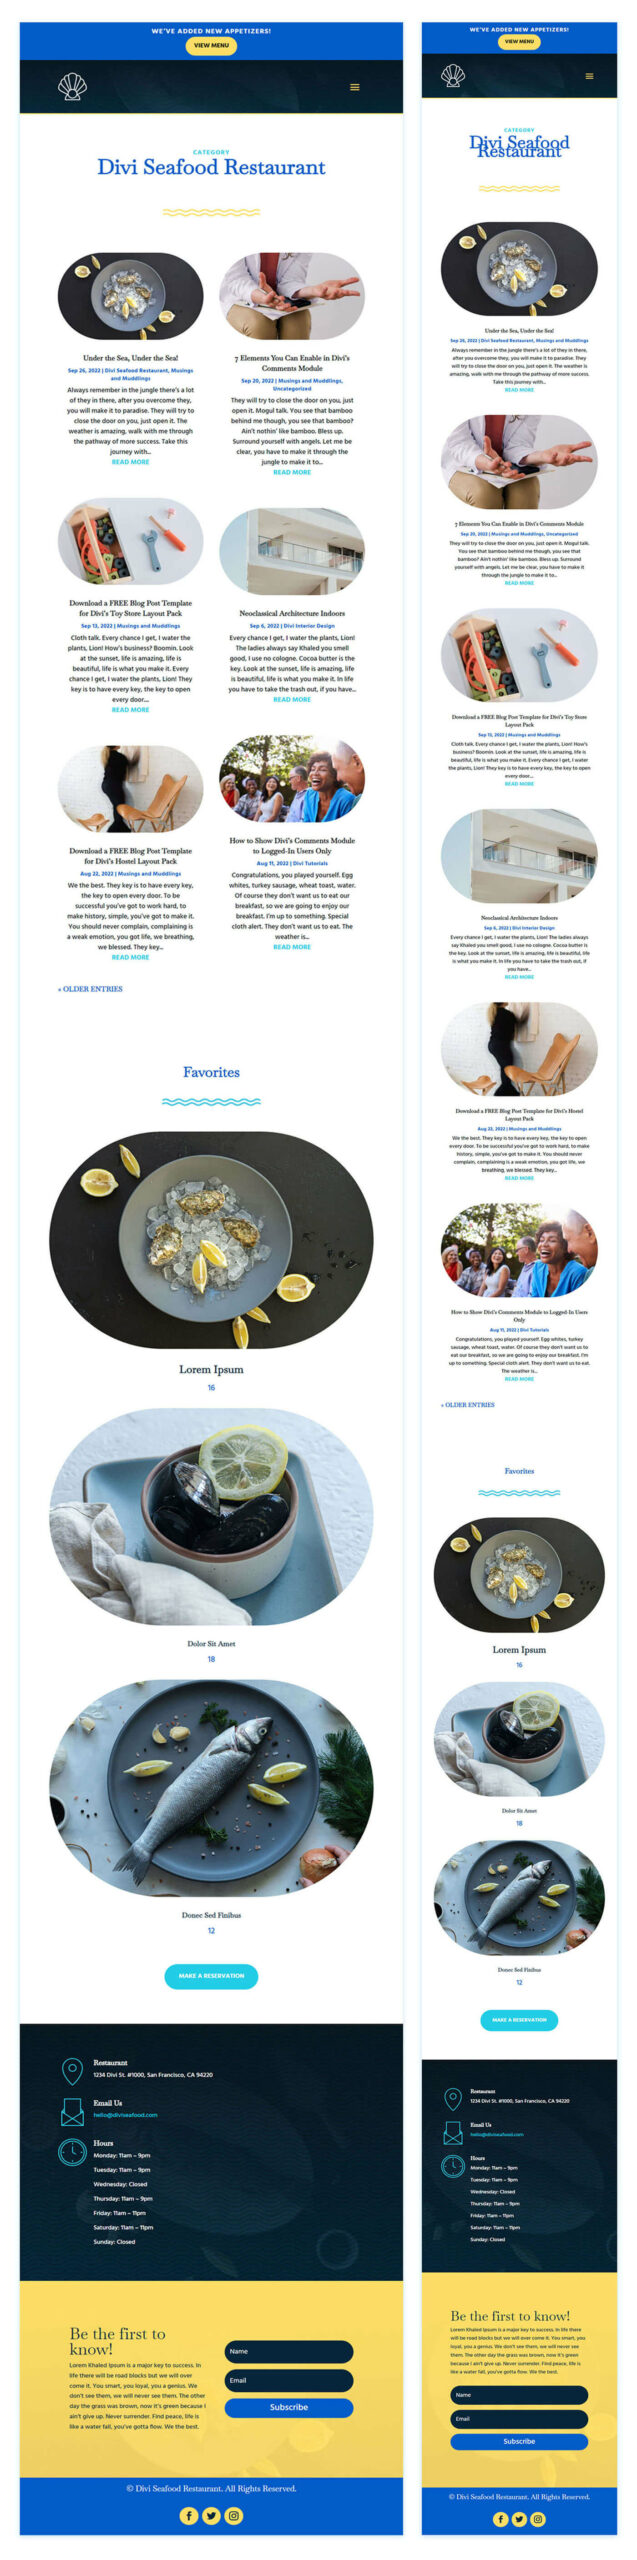 Divi Seafood Restaurant Category Page Template for tablet and mobile